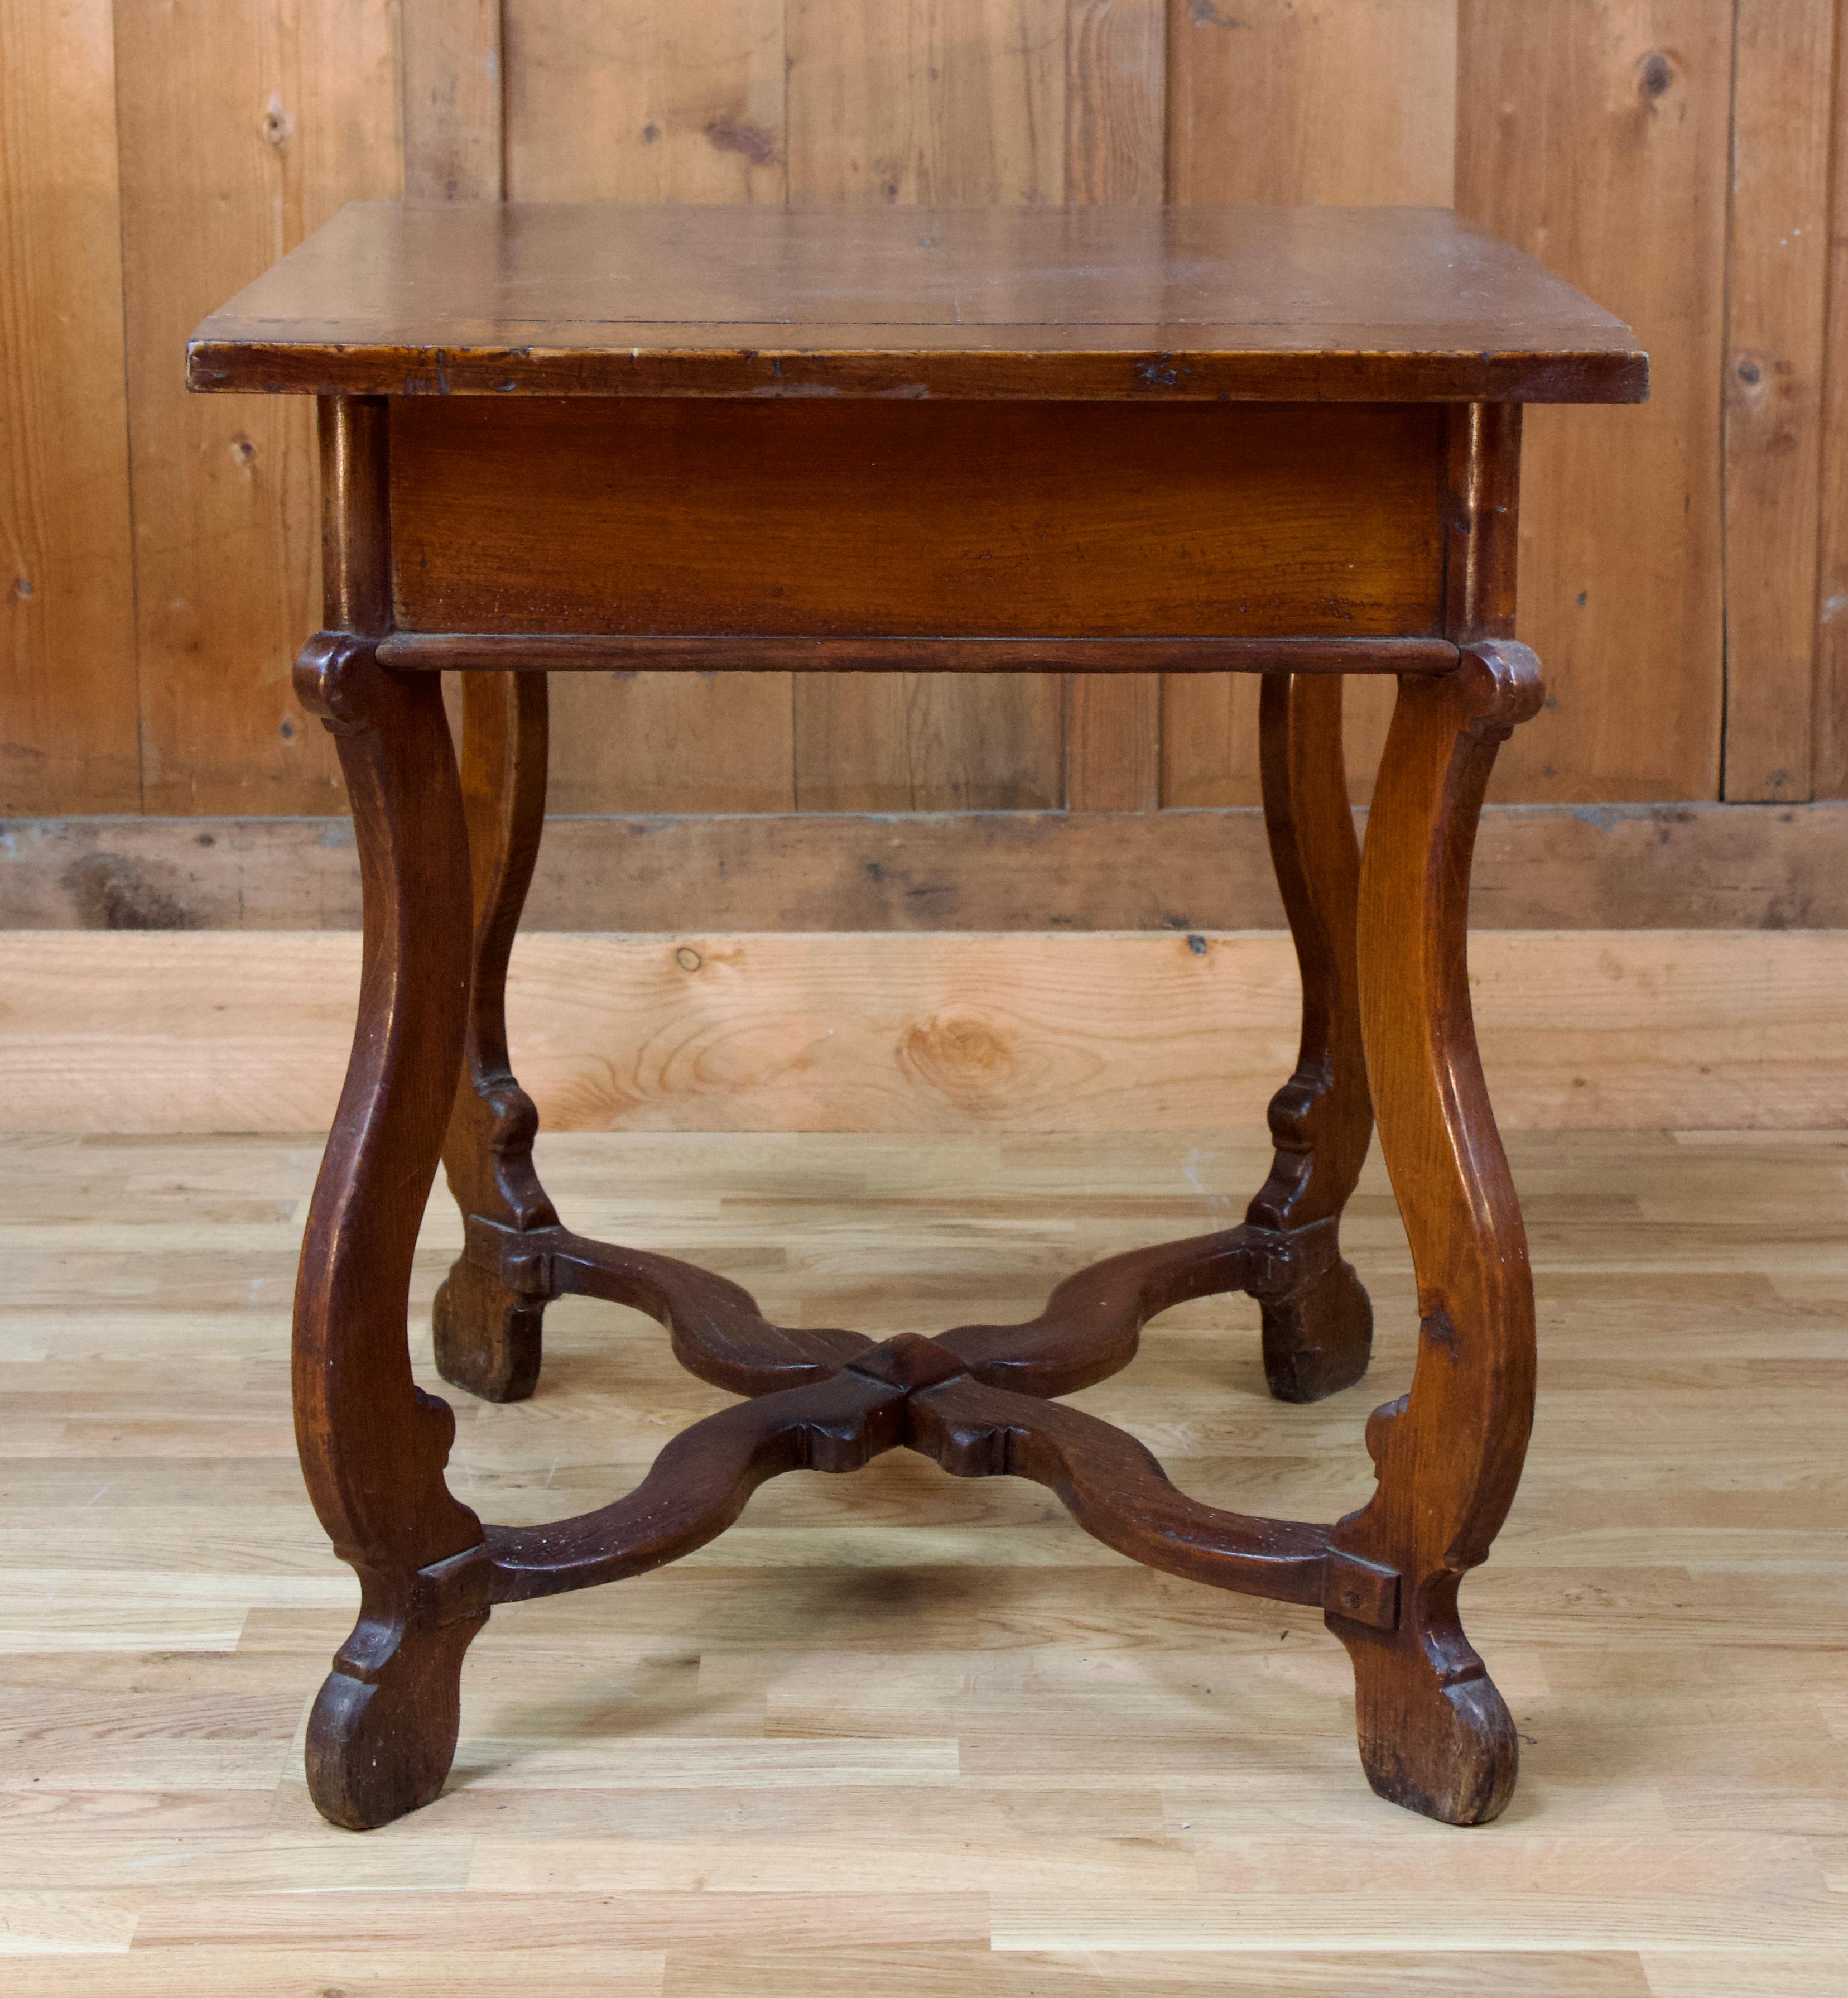 Beautiful cherry wood table from the 19th century, in the style of the 17th, featuring a frieze drawer and four curved legs connected by a spacer.
The lyre-shaped uprights, with elegant curves, are joined by the brace crosspieces of the X-shaped